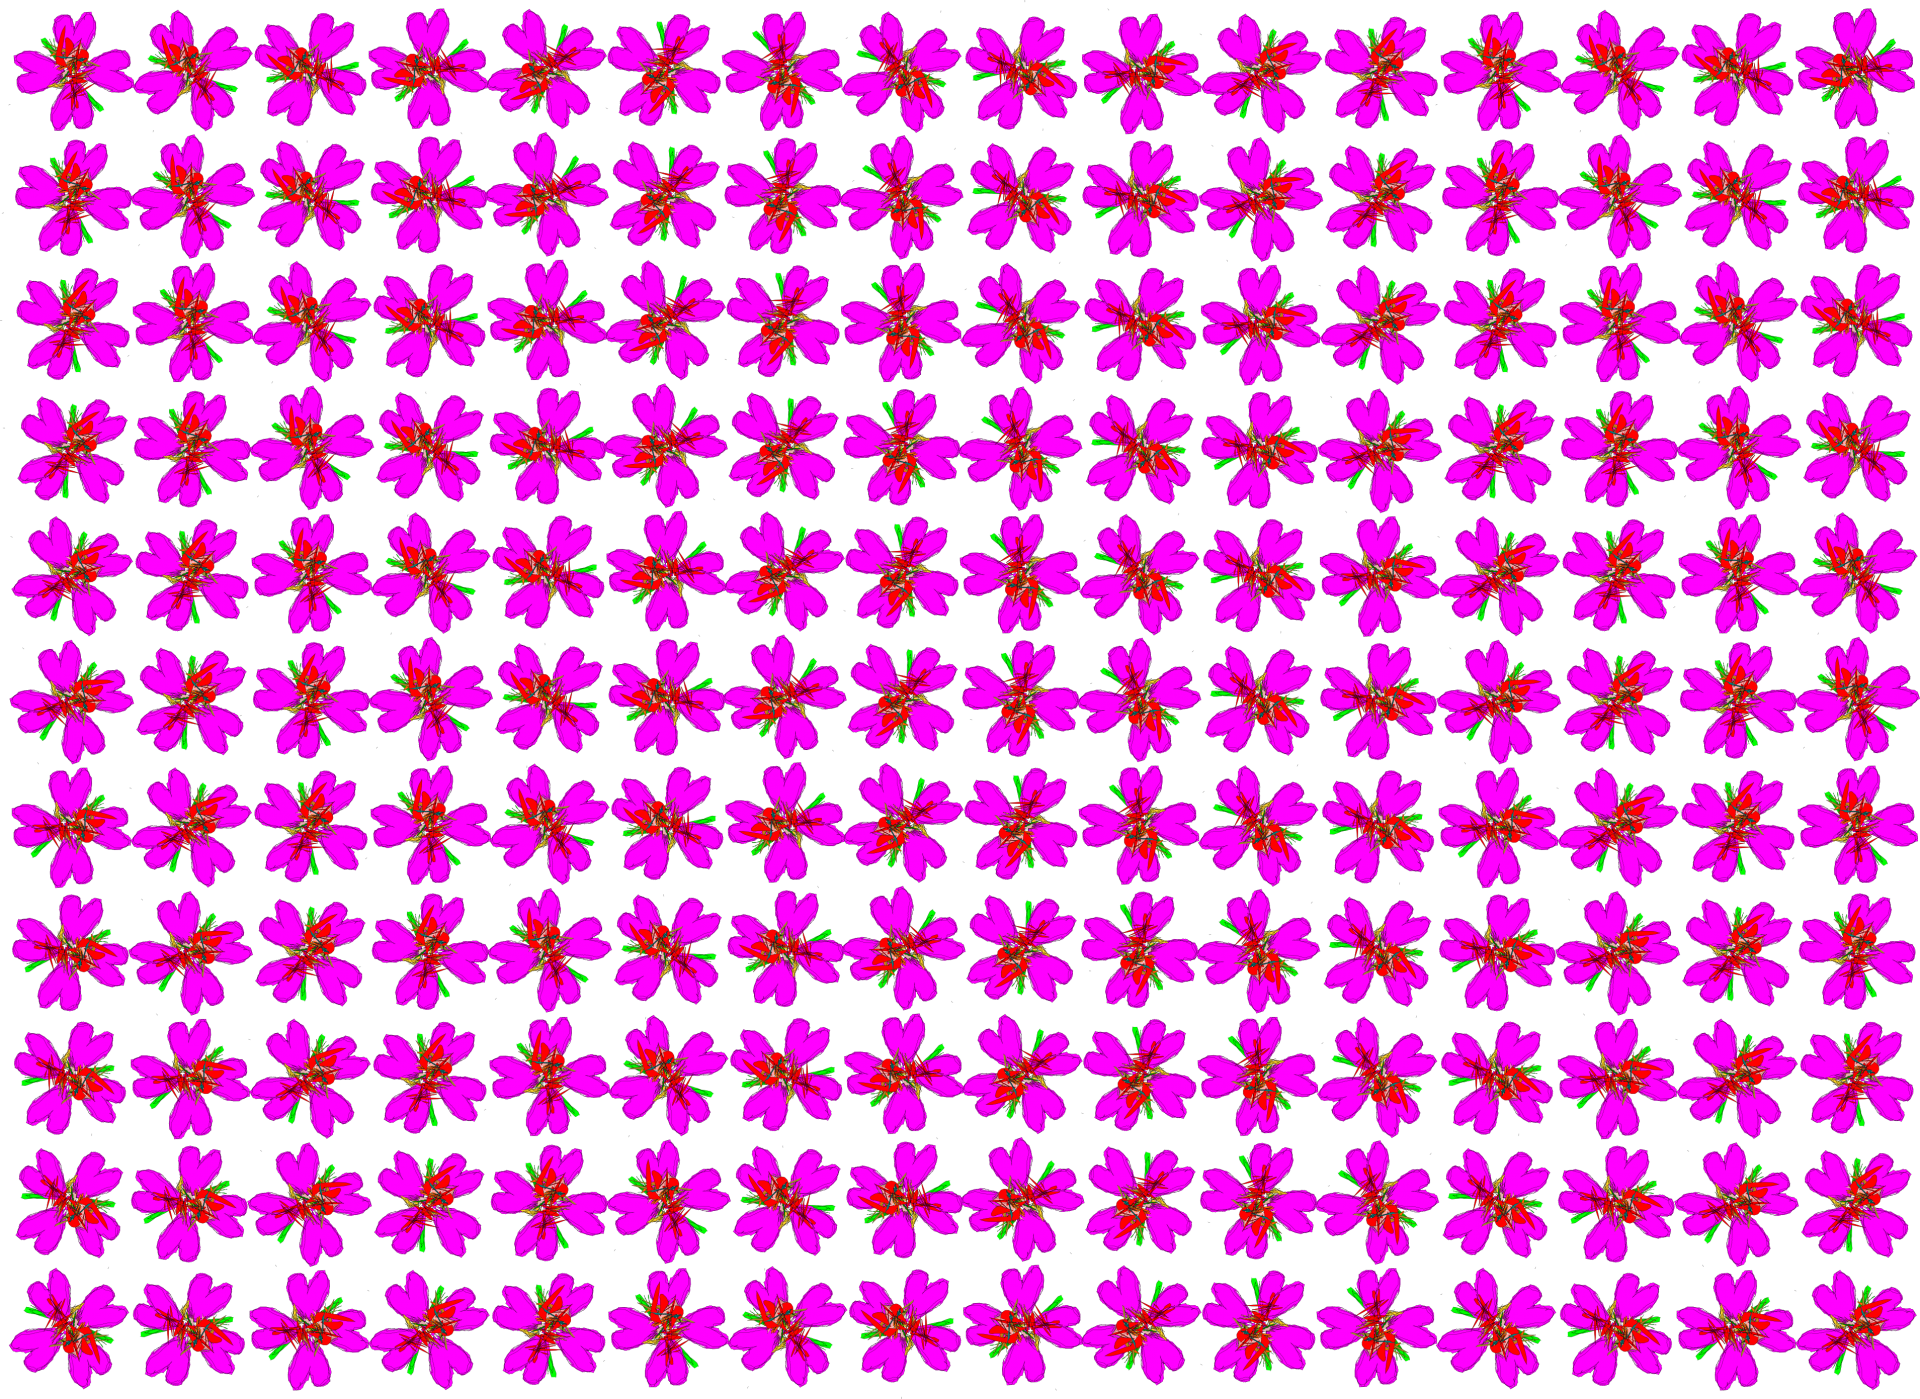 Pink Flowwers Repeat Tile Pattern